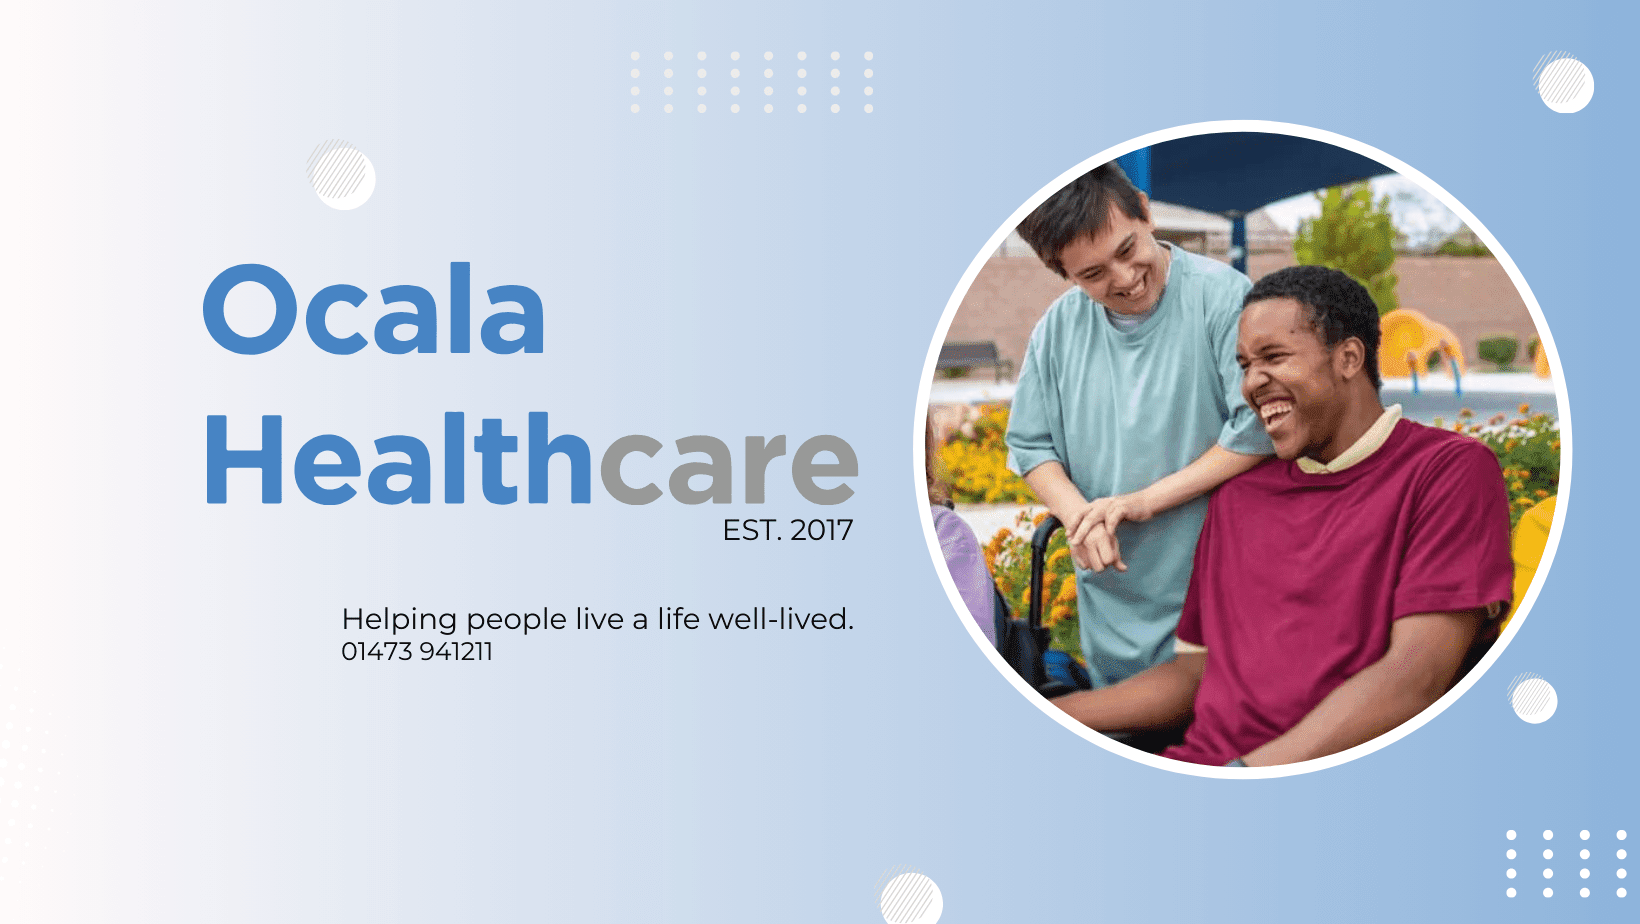 Ocala Healthcare - Helping people to live a life well-lived